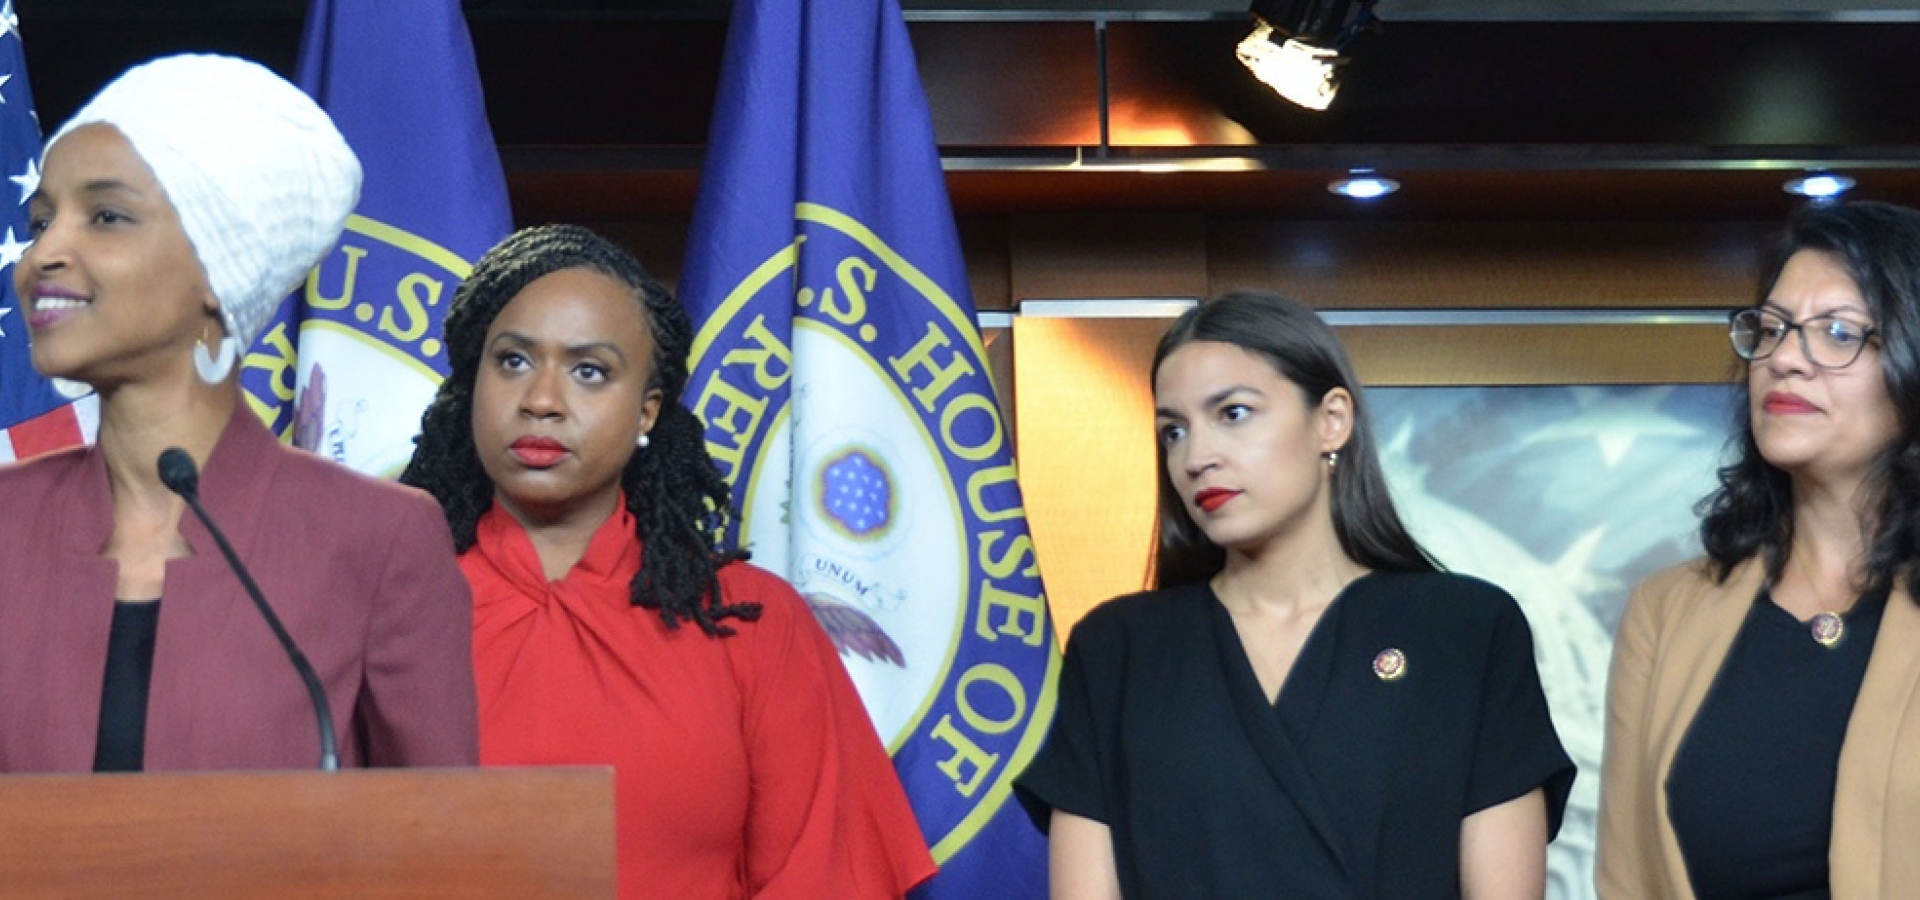 Omar, Tlaib, Ocasio-Cortez & Pressley Lead Call for International Investigation Into Alleged DHS Human Rights Abuses